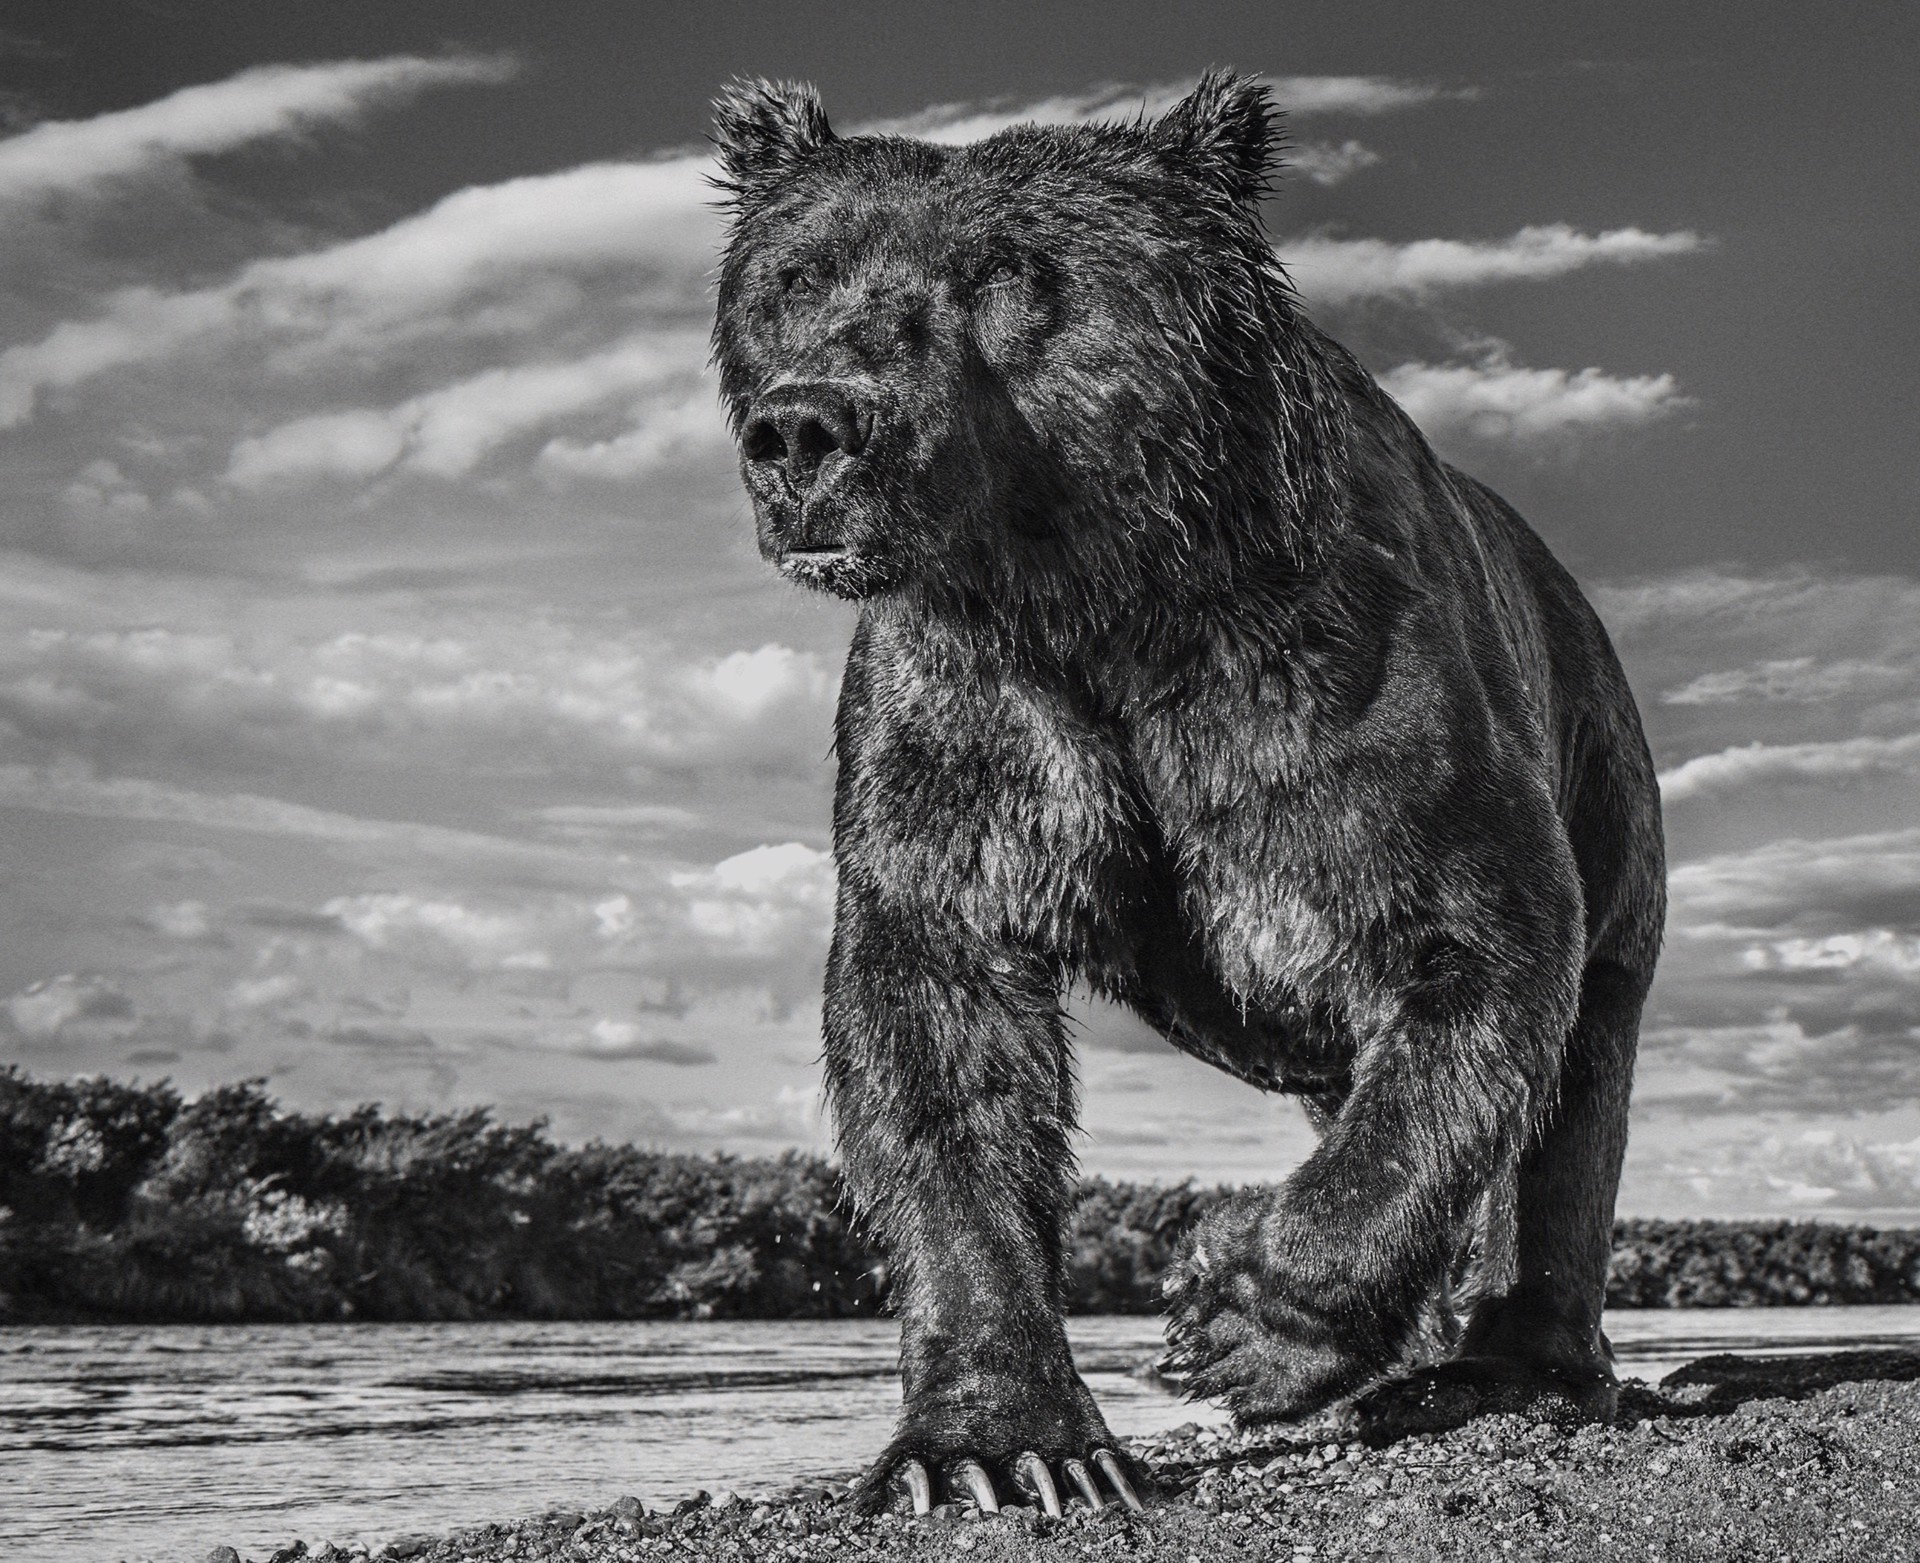 The Fisher King by David Yarrow